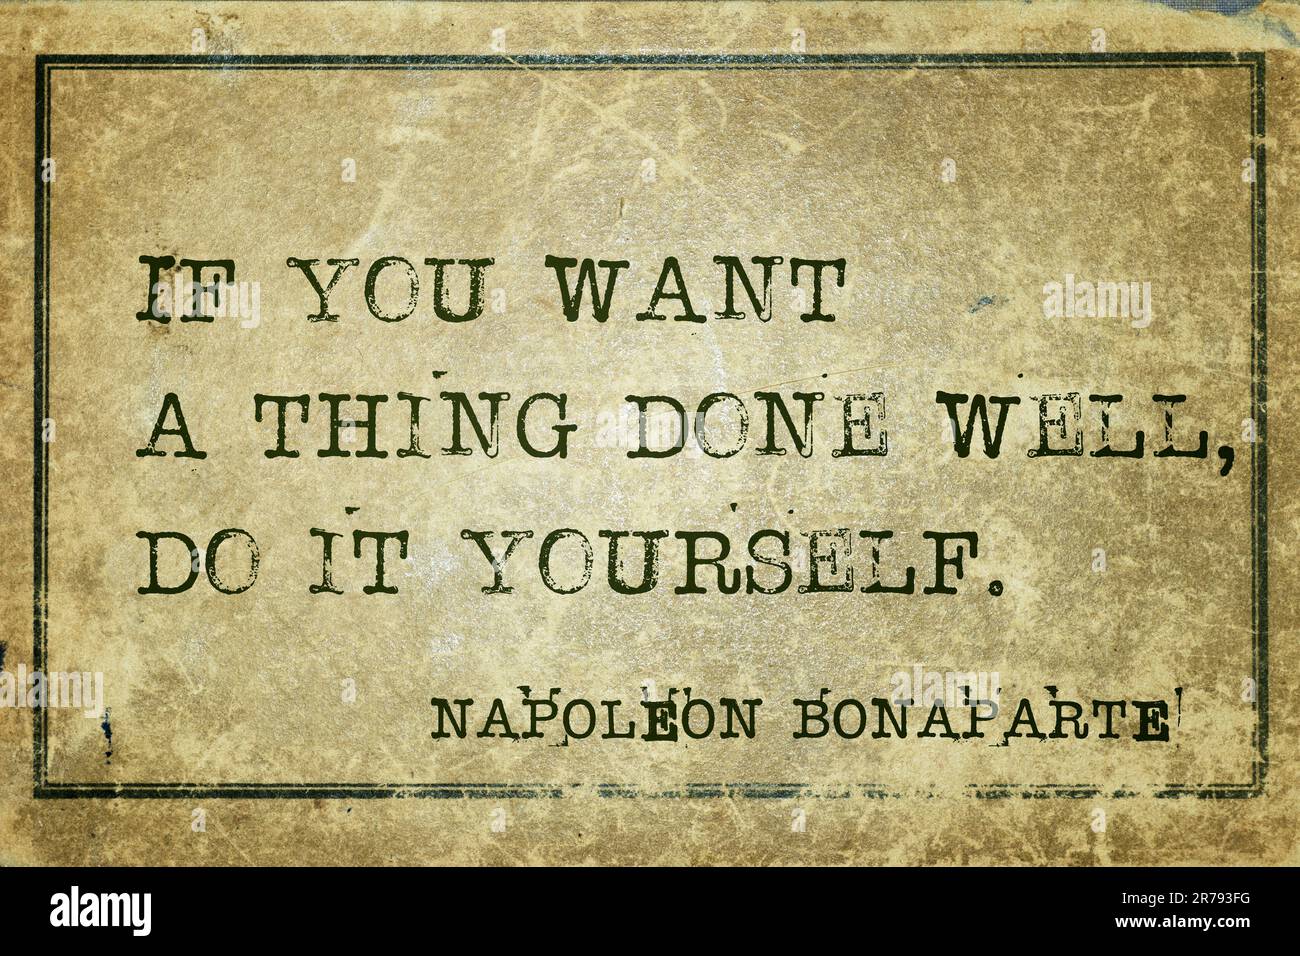 If you want a thing done well, do it yourself - ancient French military and political leader Napoleon Bonaparte quote printed on vintage cardboard Stock Photo